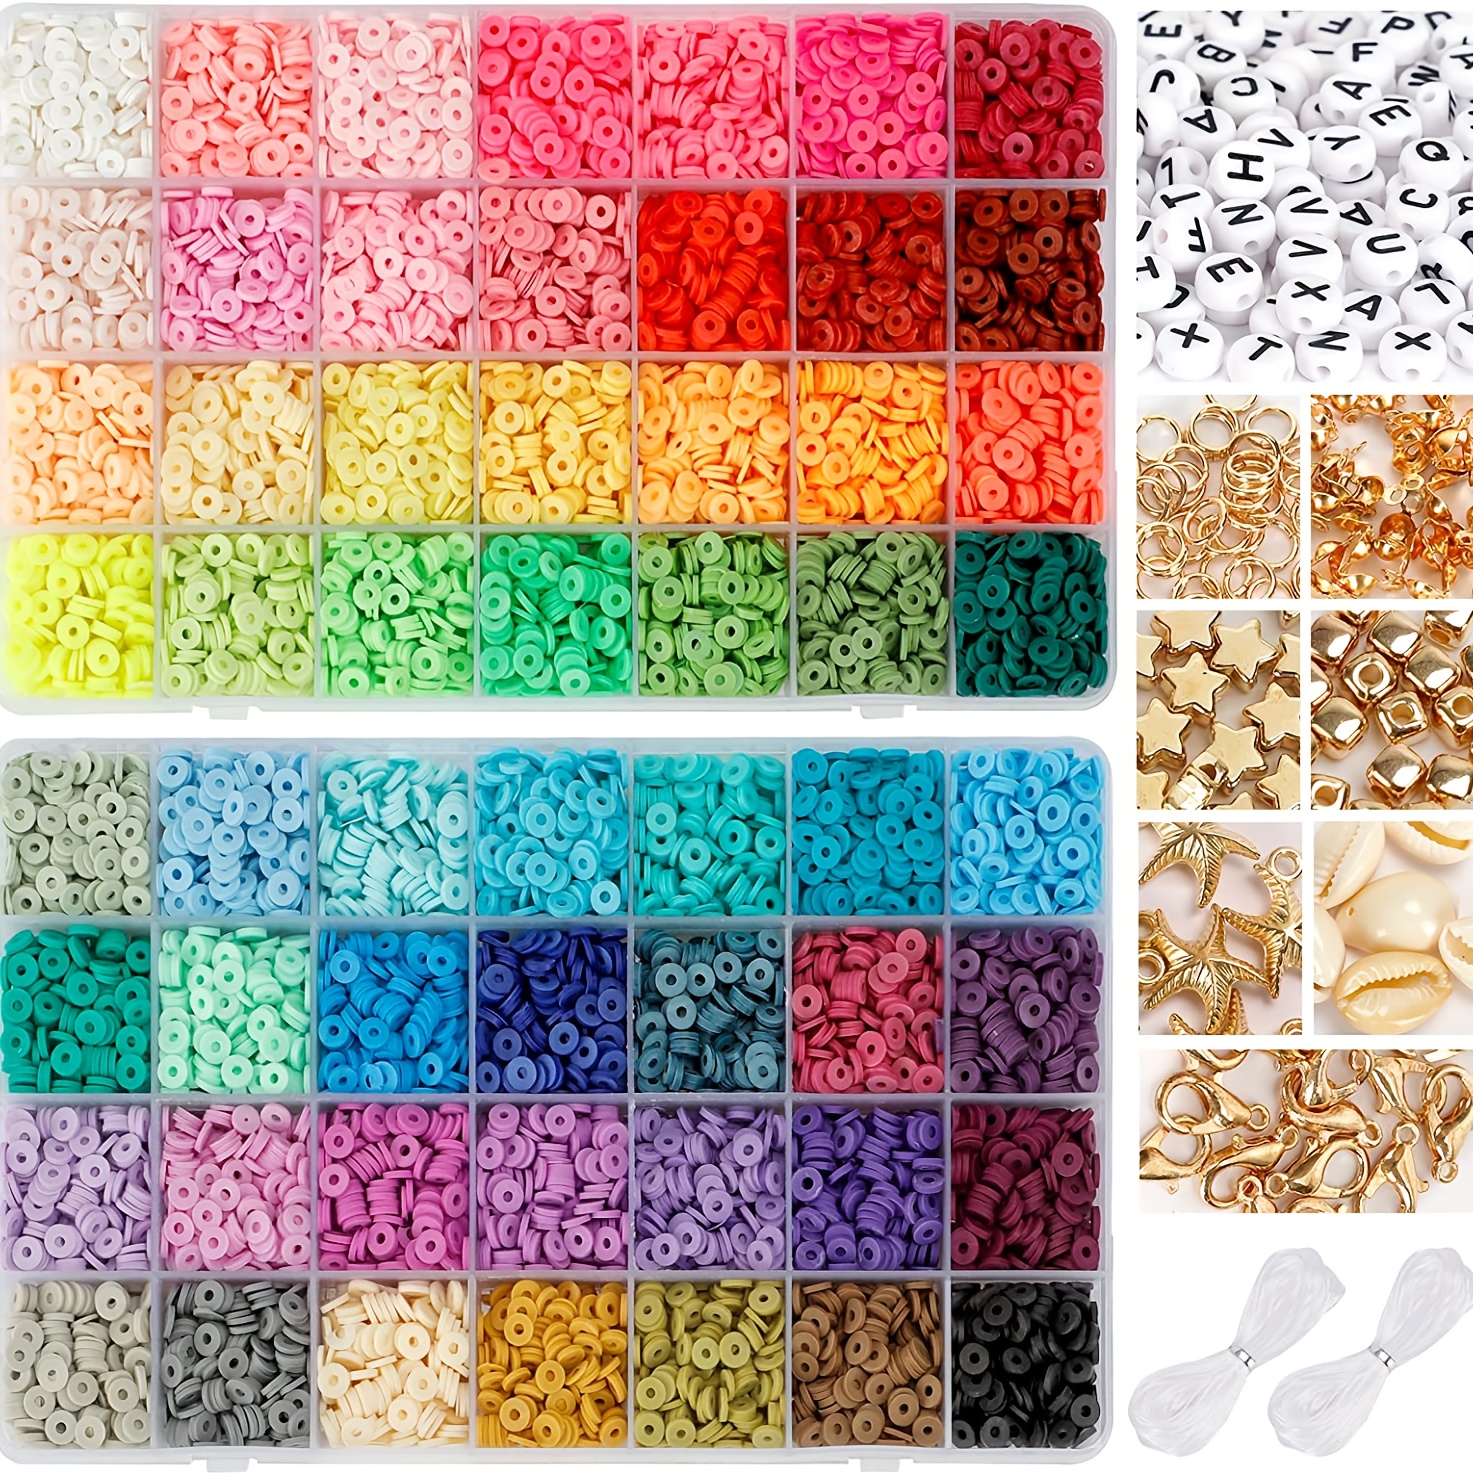  TINY FUN 16800pcs 72 Colors Clay Beads and 48 Colors